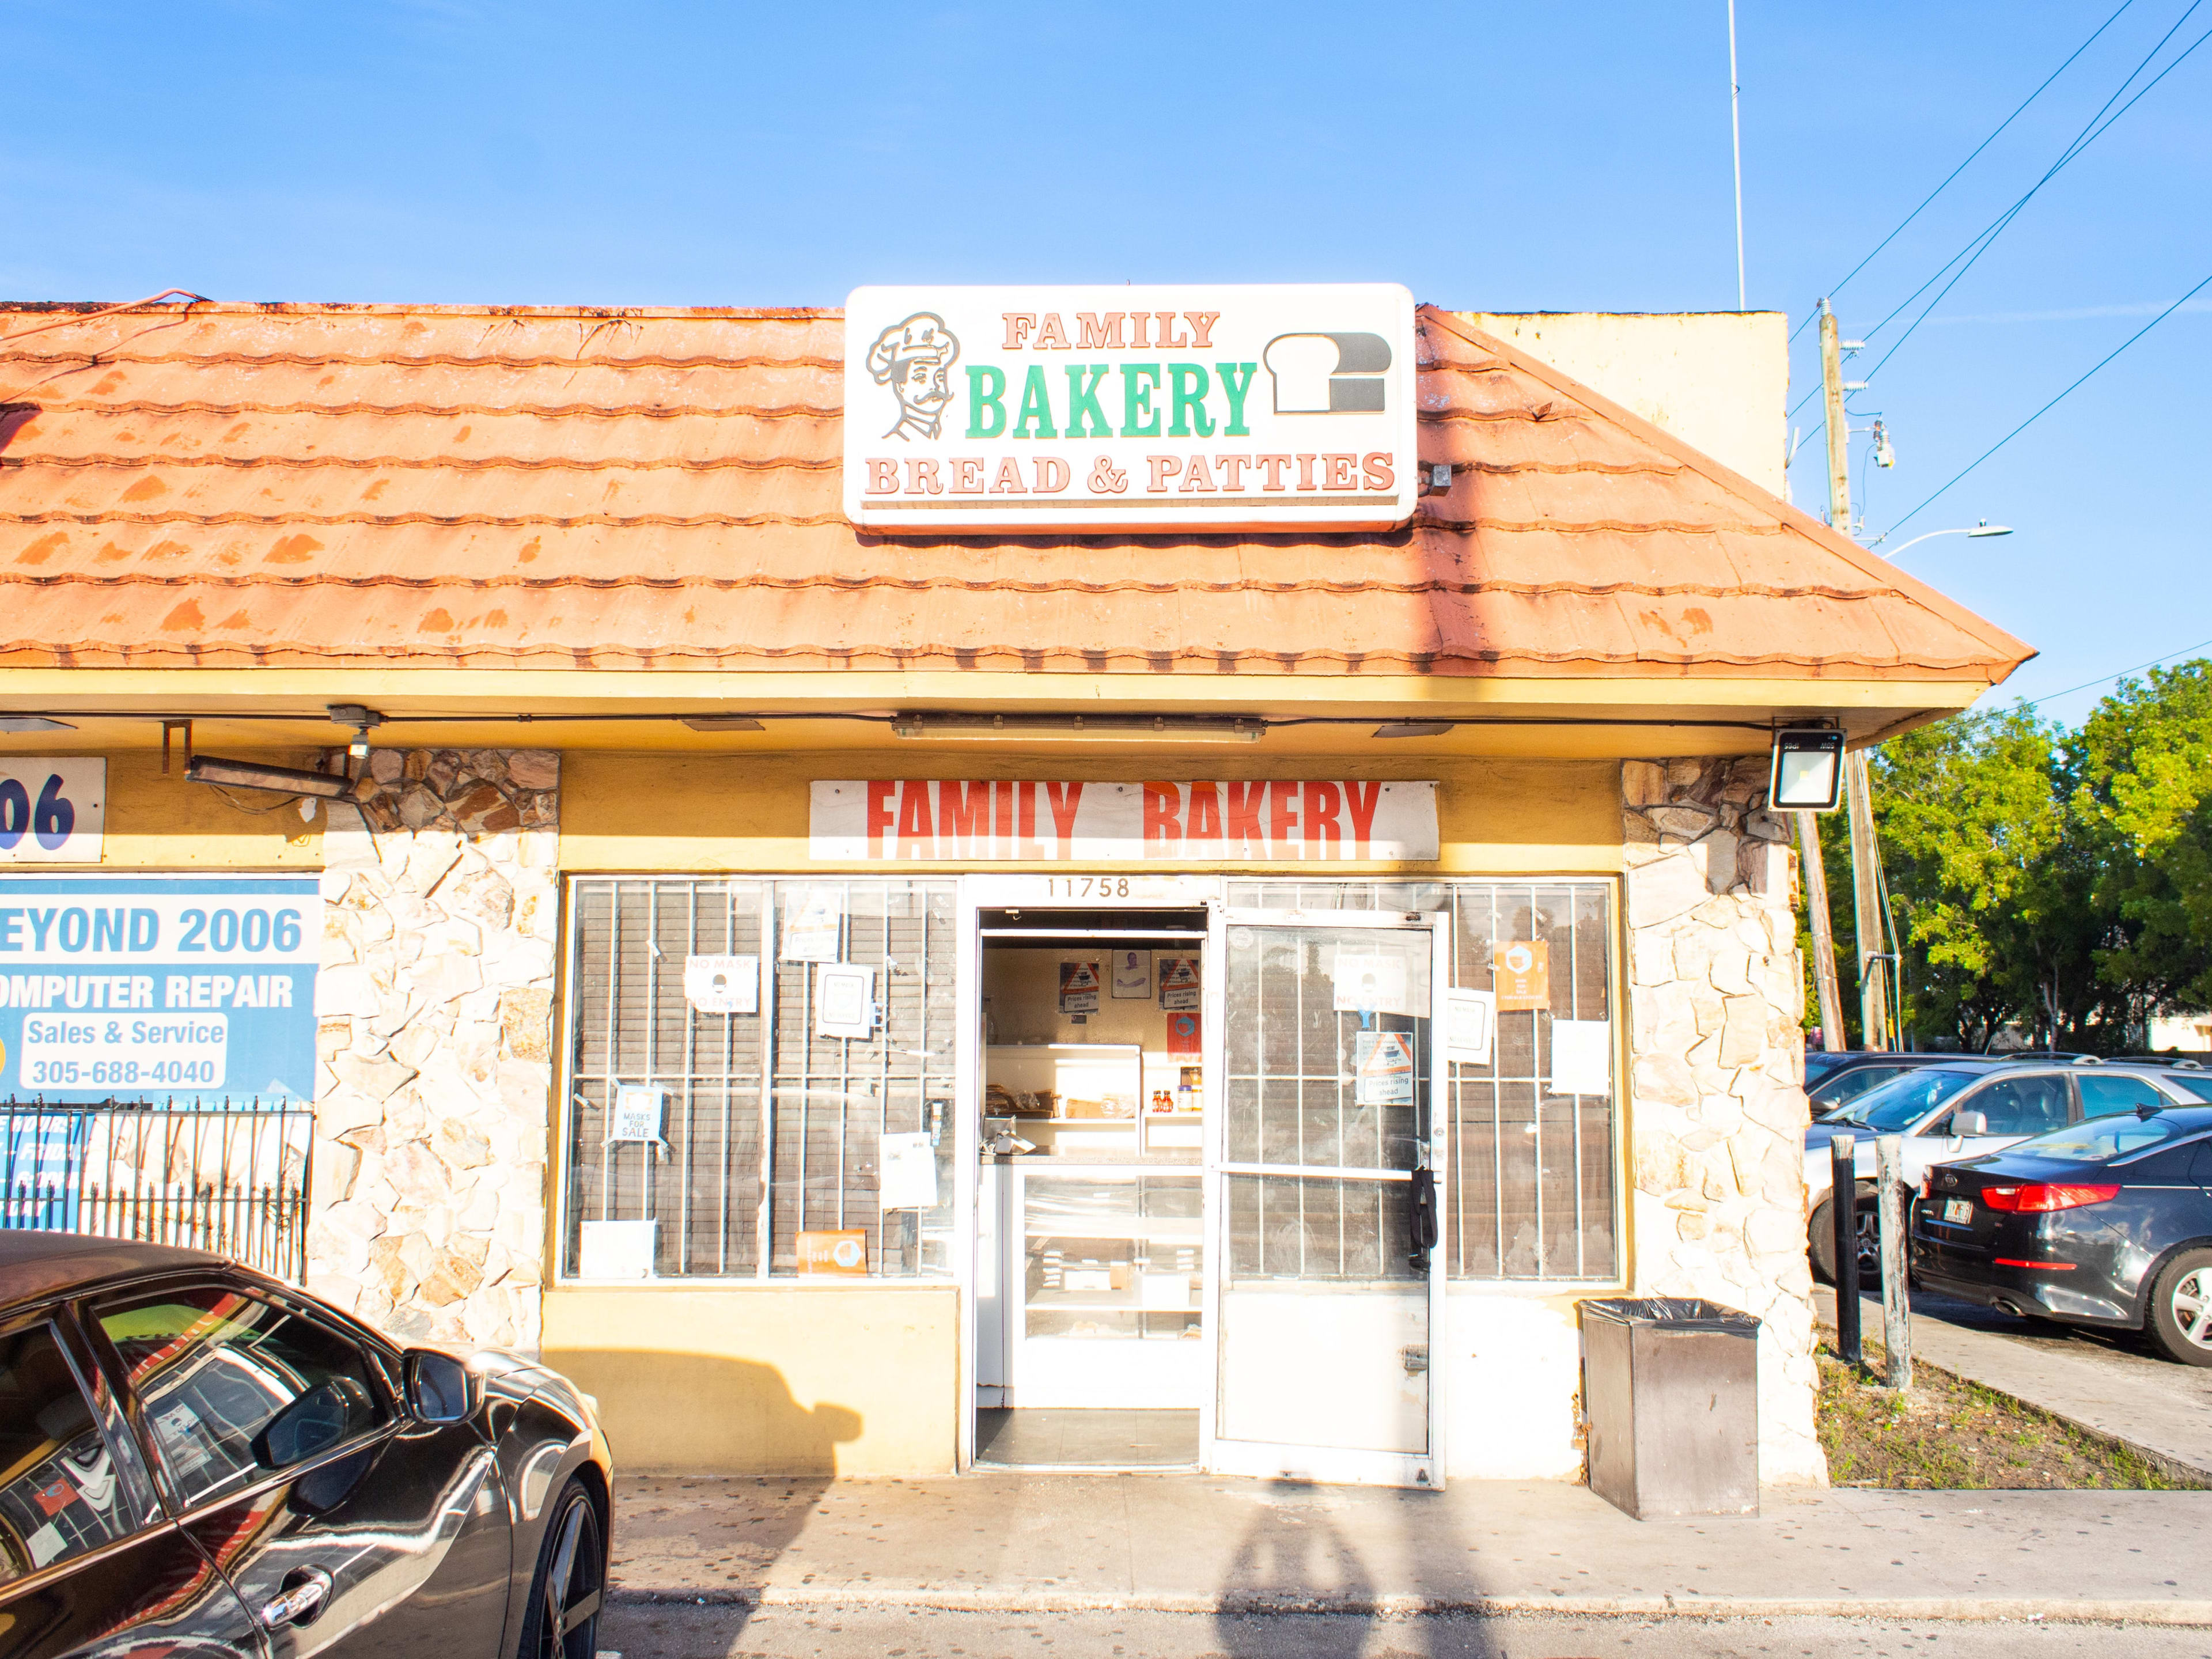 Family Bakery review image